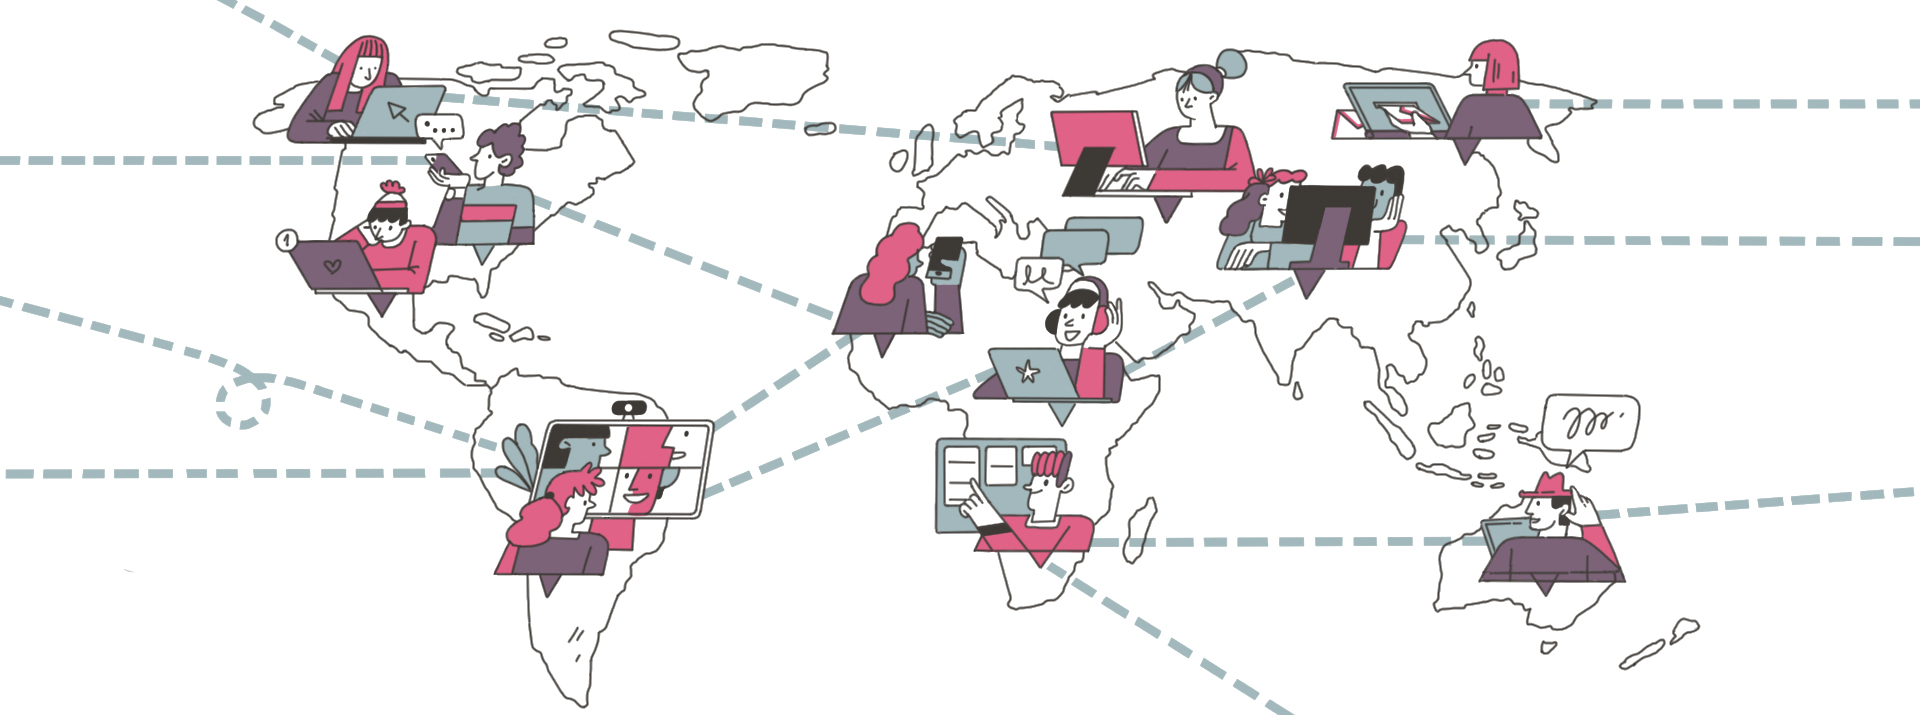 Globally distributed teams' communication and collaboration tools